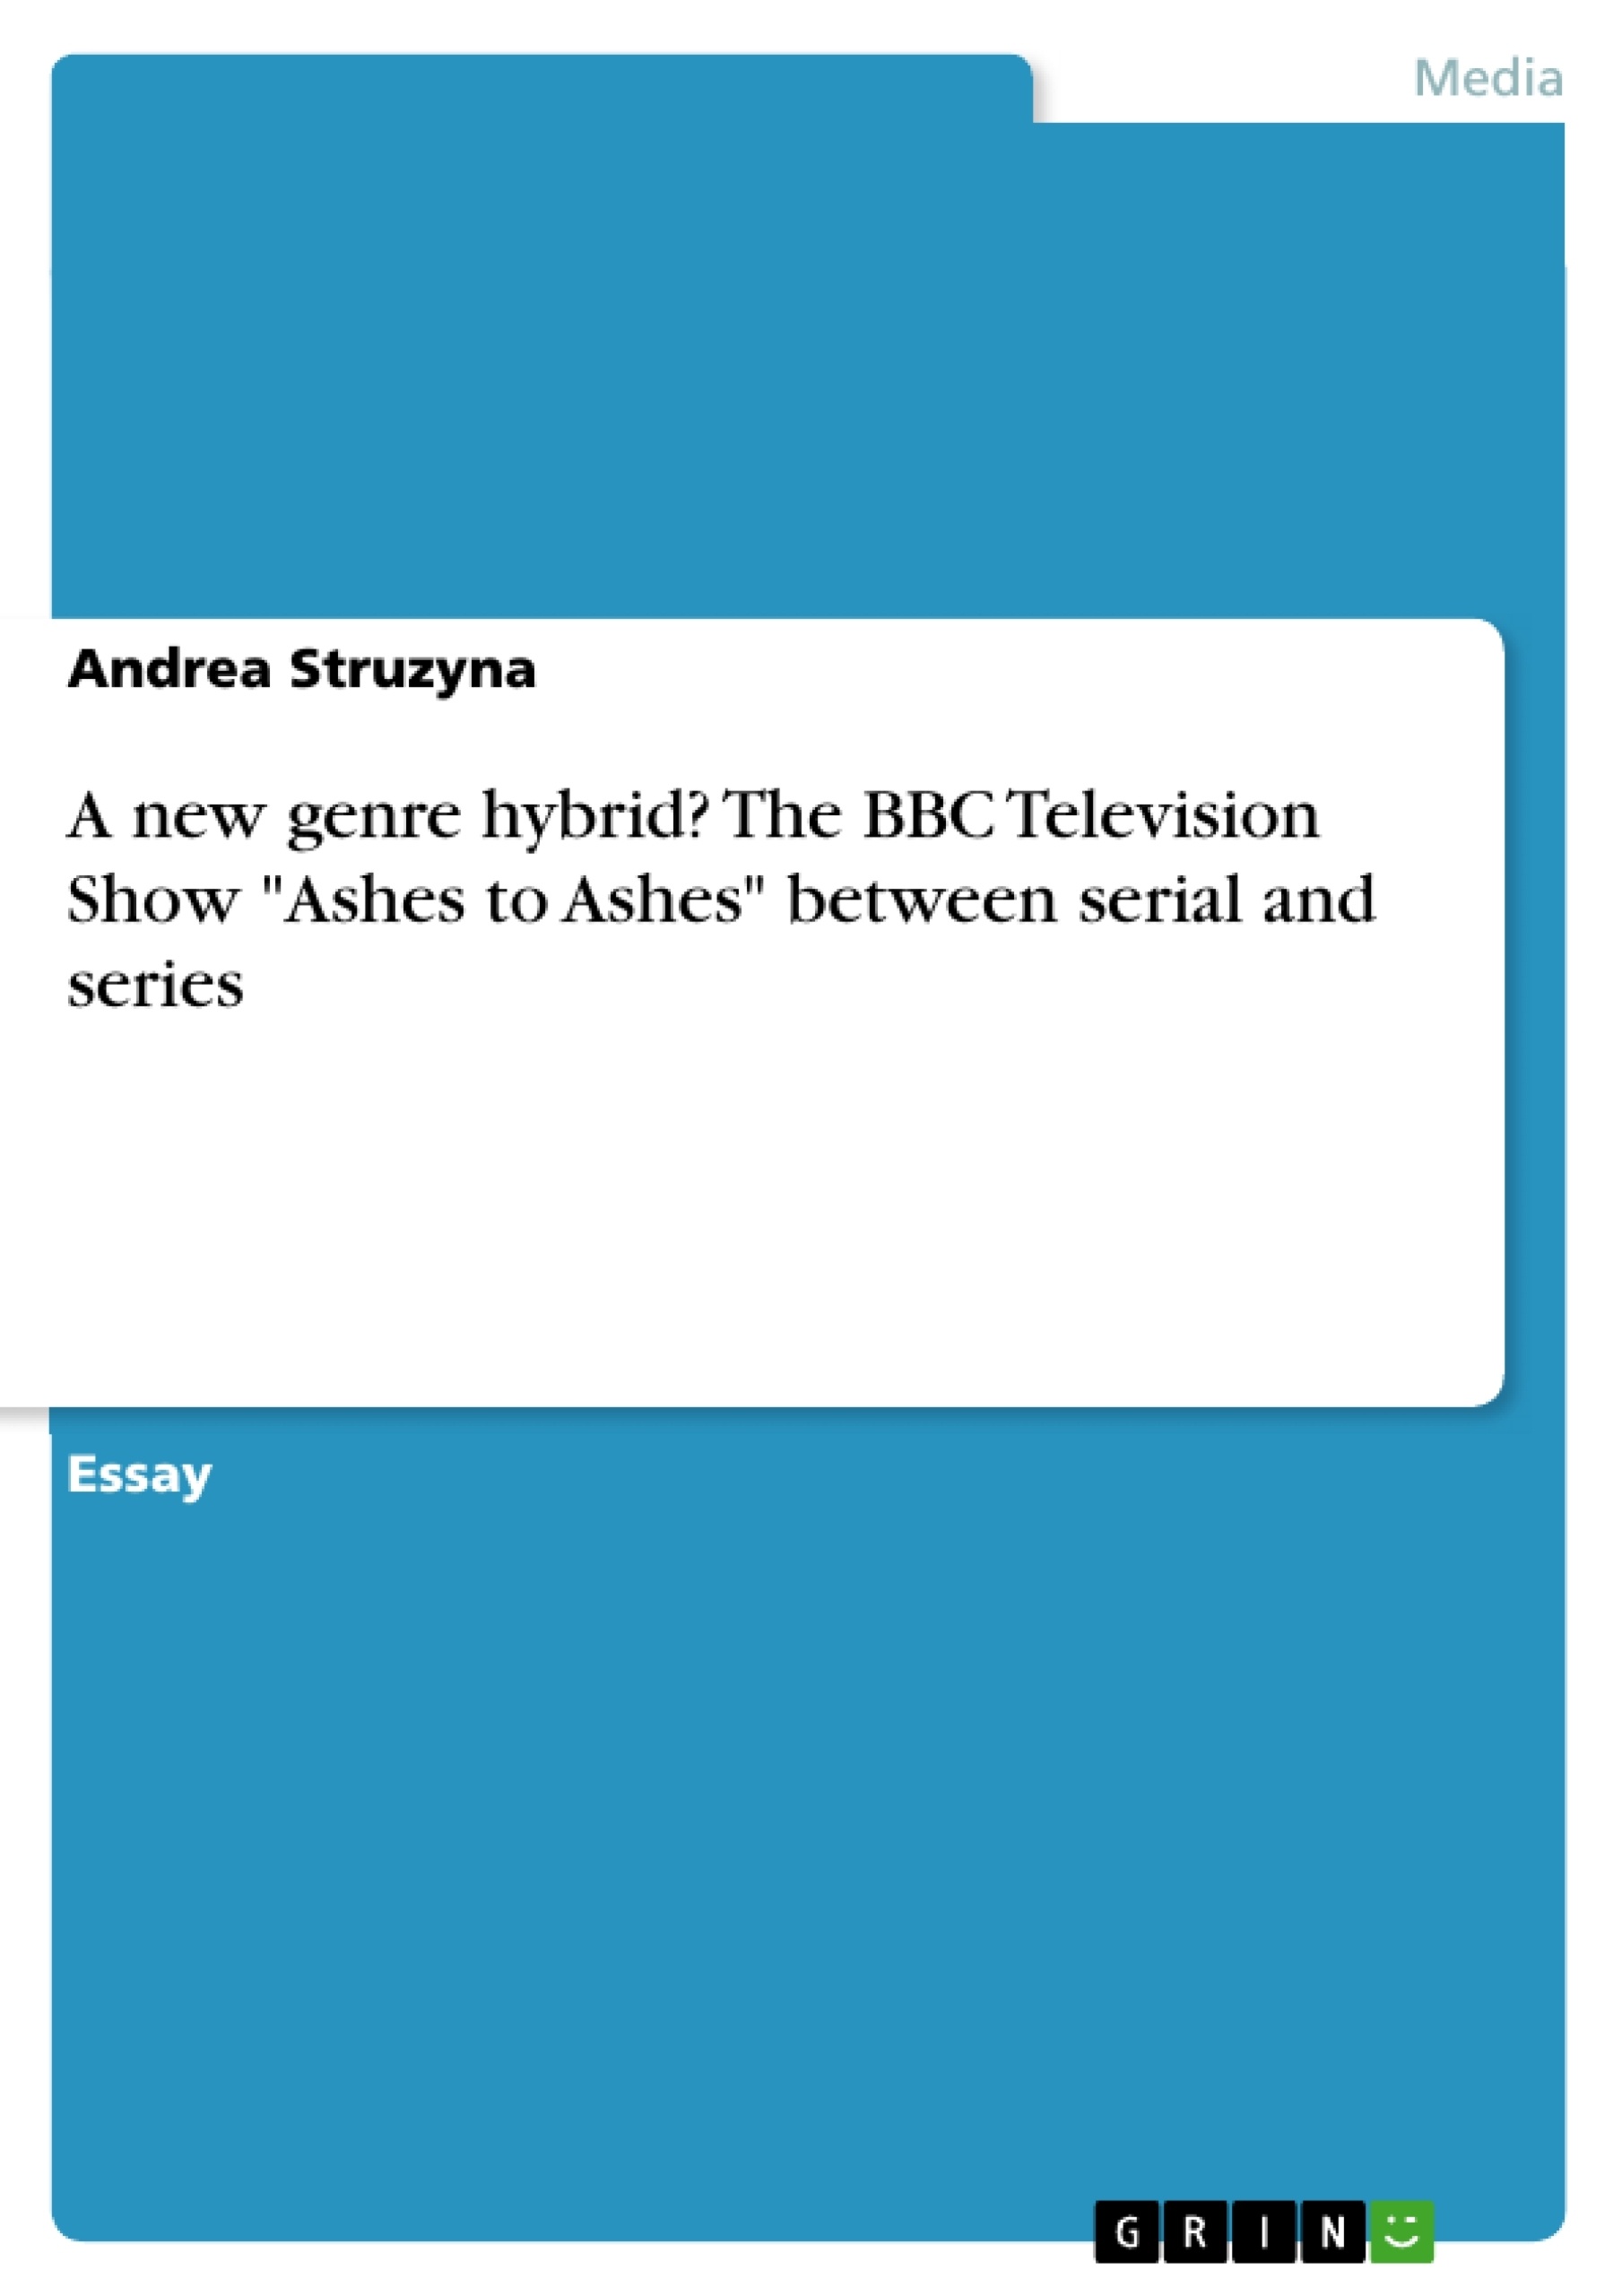 Title: A new genre hybrid? The BBC Television Show "Ashes to Ashes" between serial and series